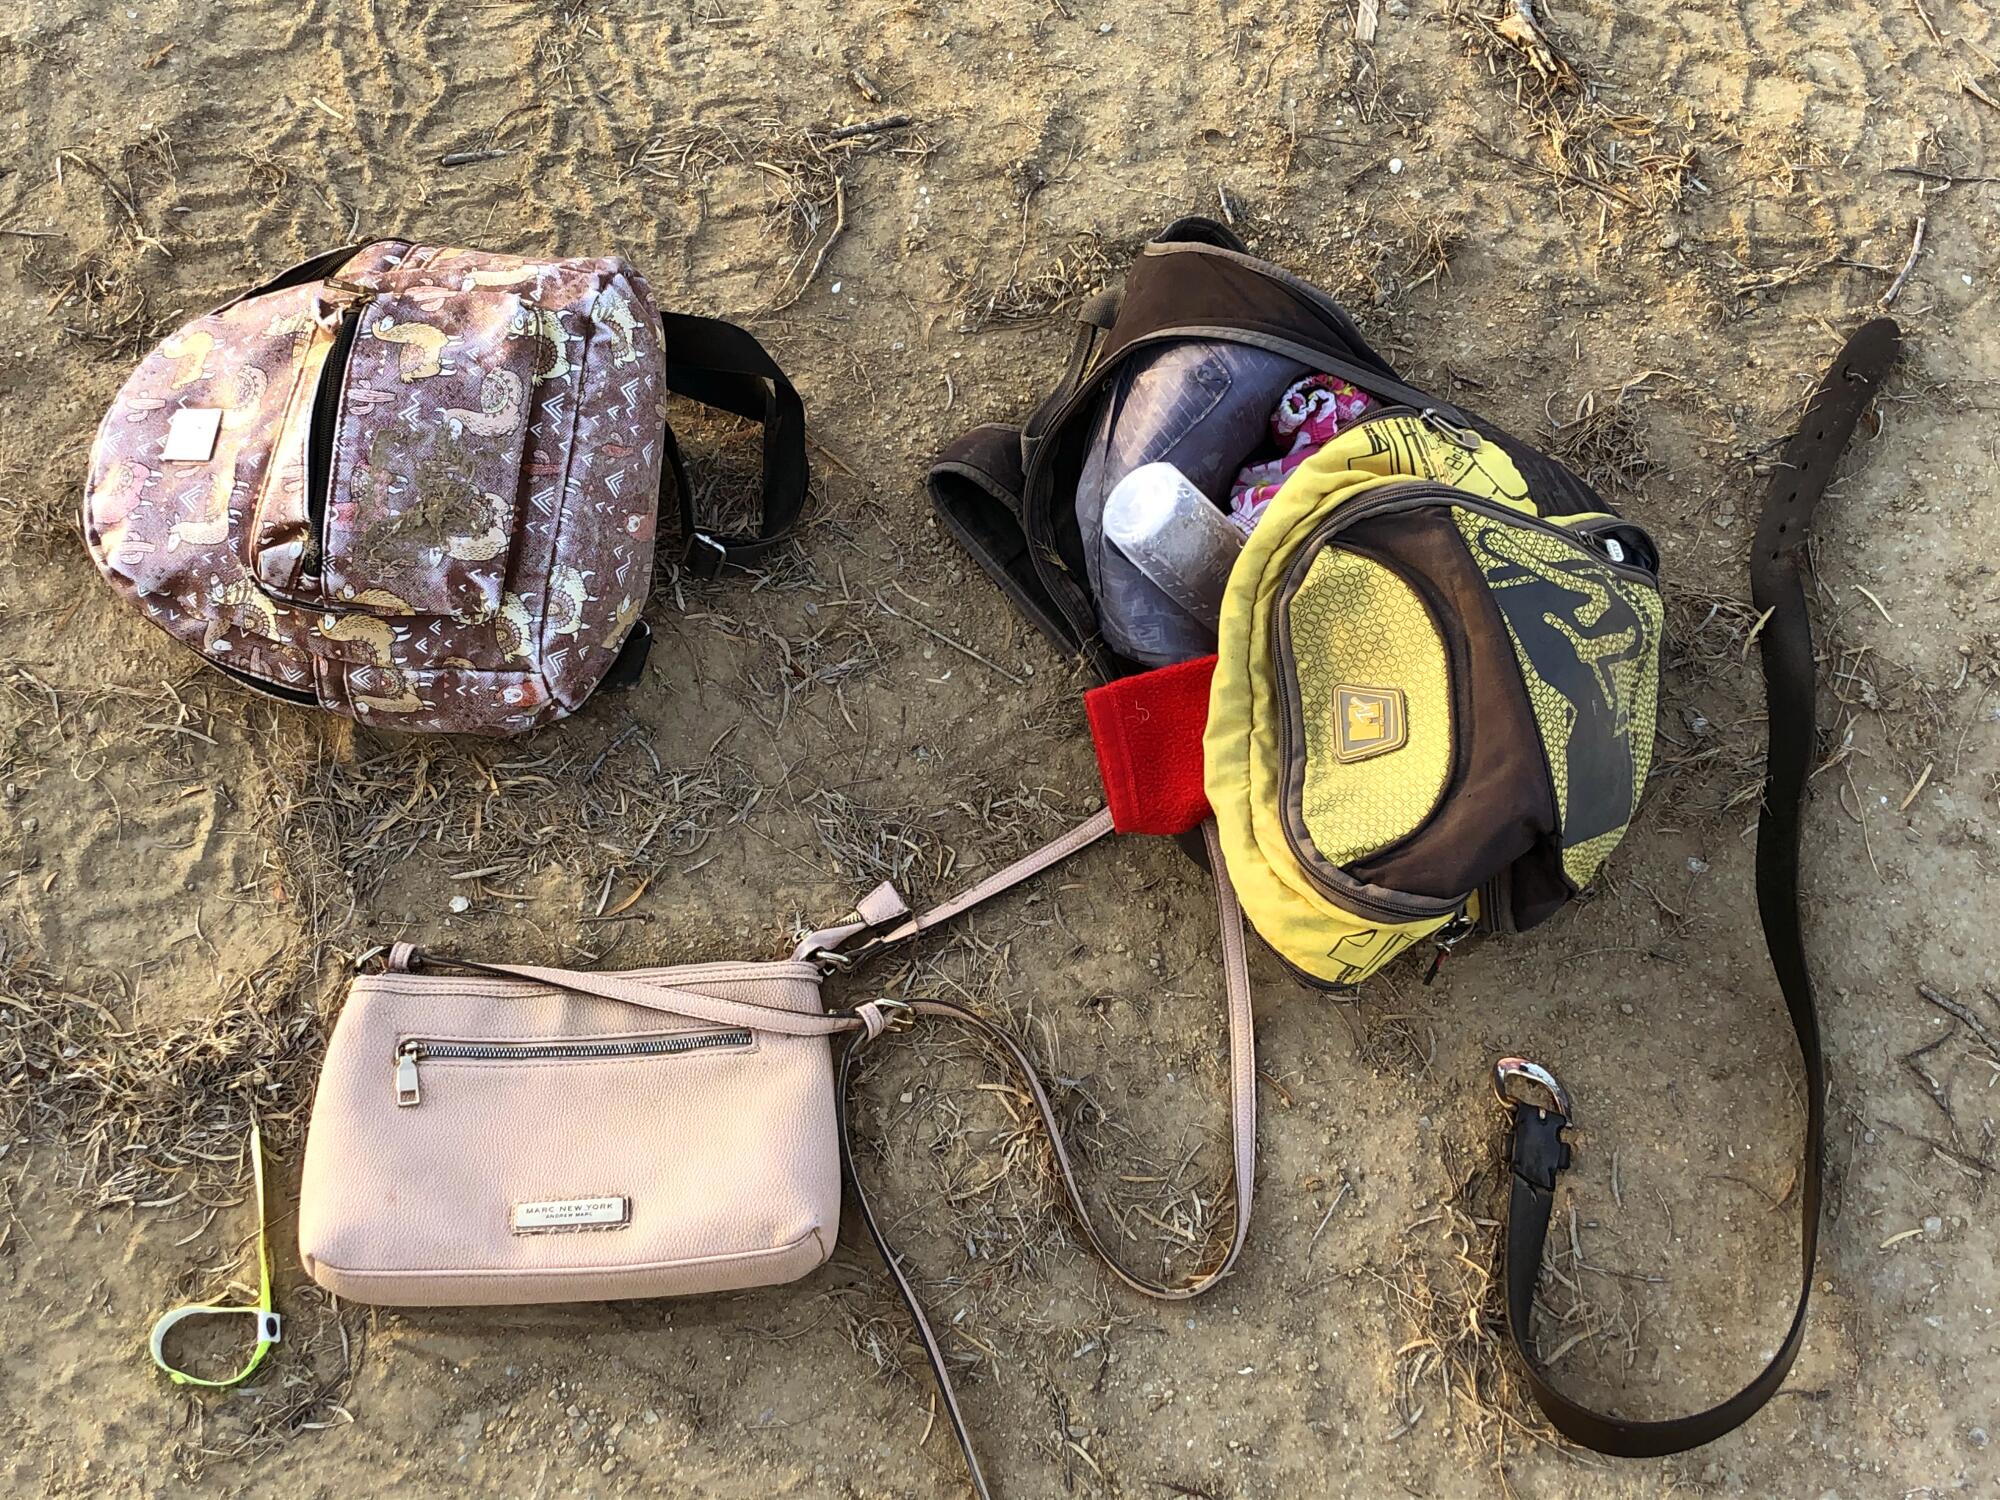 Backpacks, purses and a belt lying in the dirt